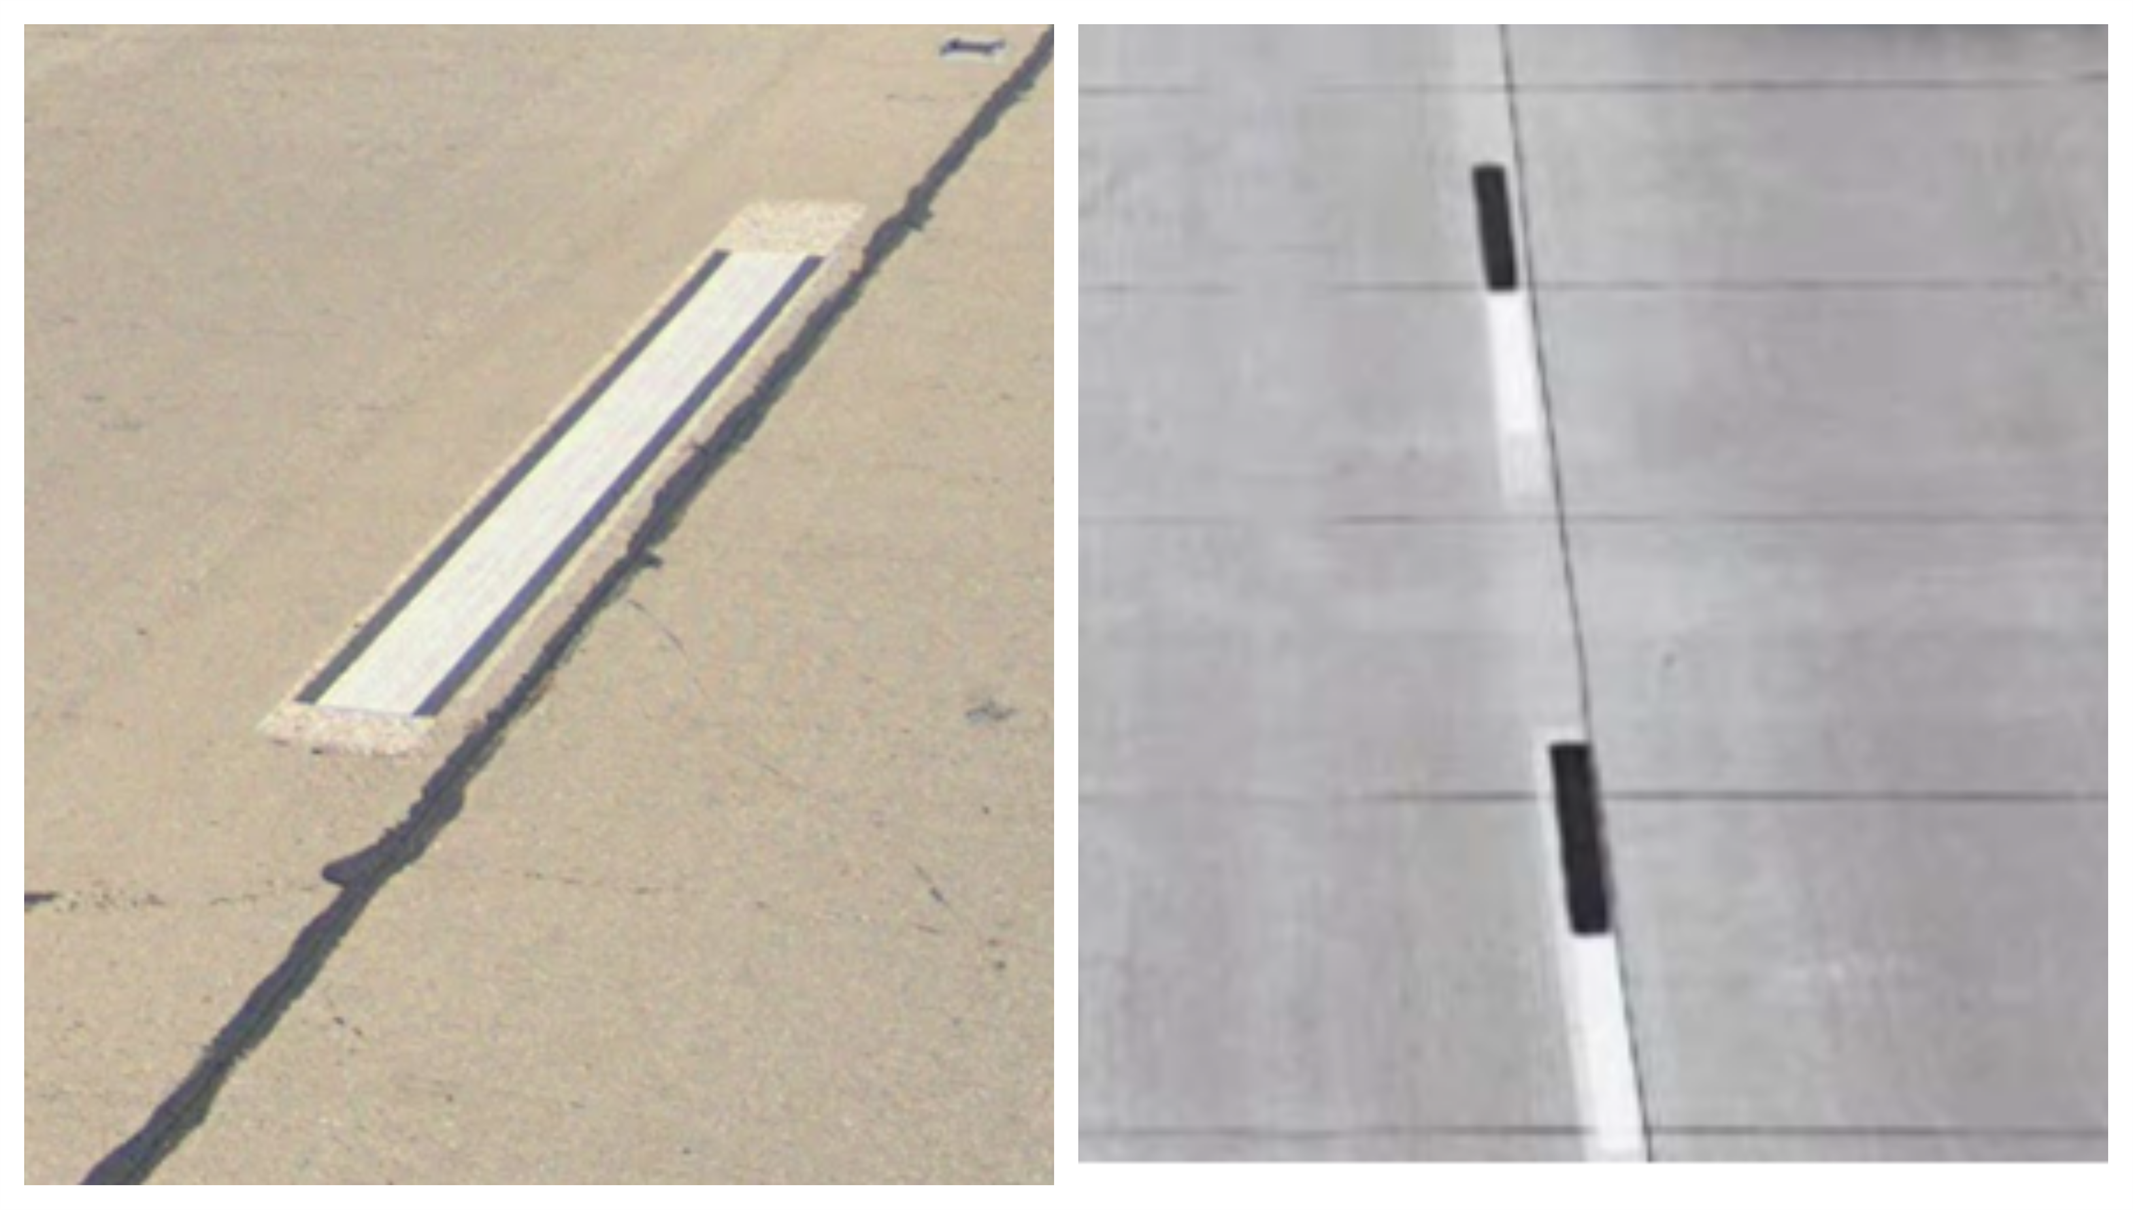 Contrast pavement markings have two main designs, from left: bordered and lead/lag. Contrast pavement markings are intended to make the marking more visible to motorists, particularly in instances where there is glare from sunlight or adverse weather conditions.